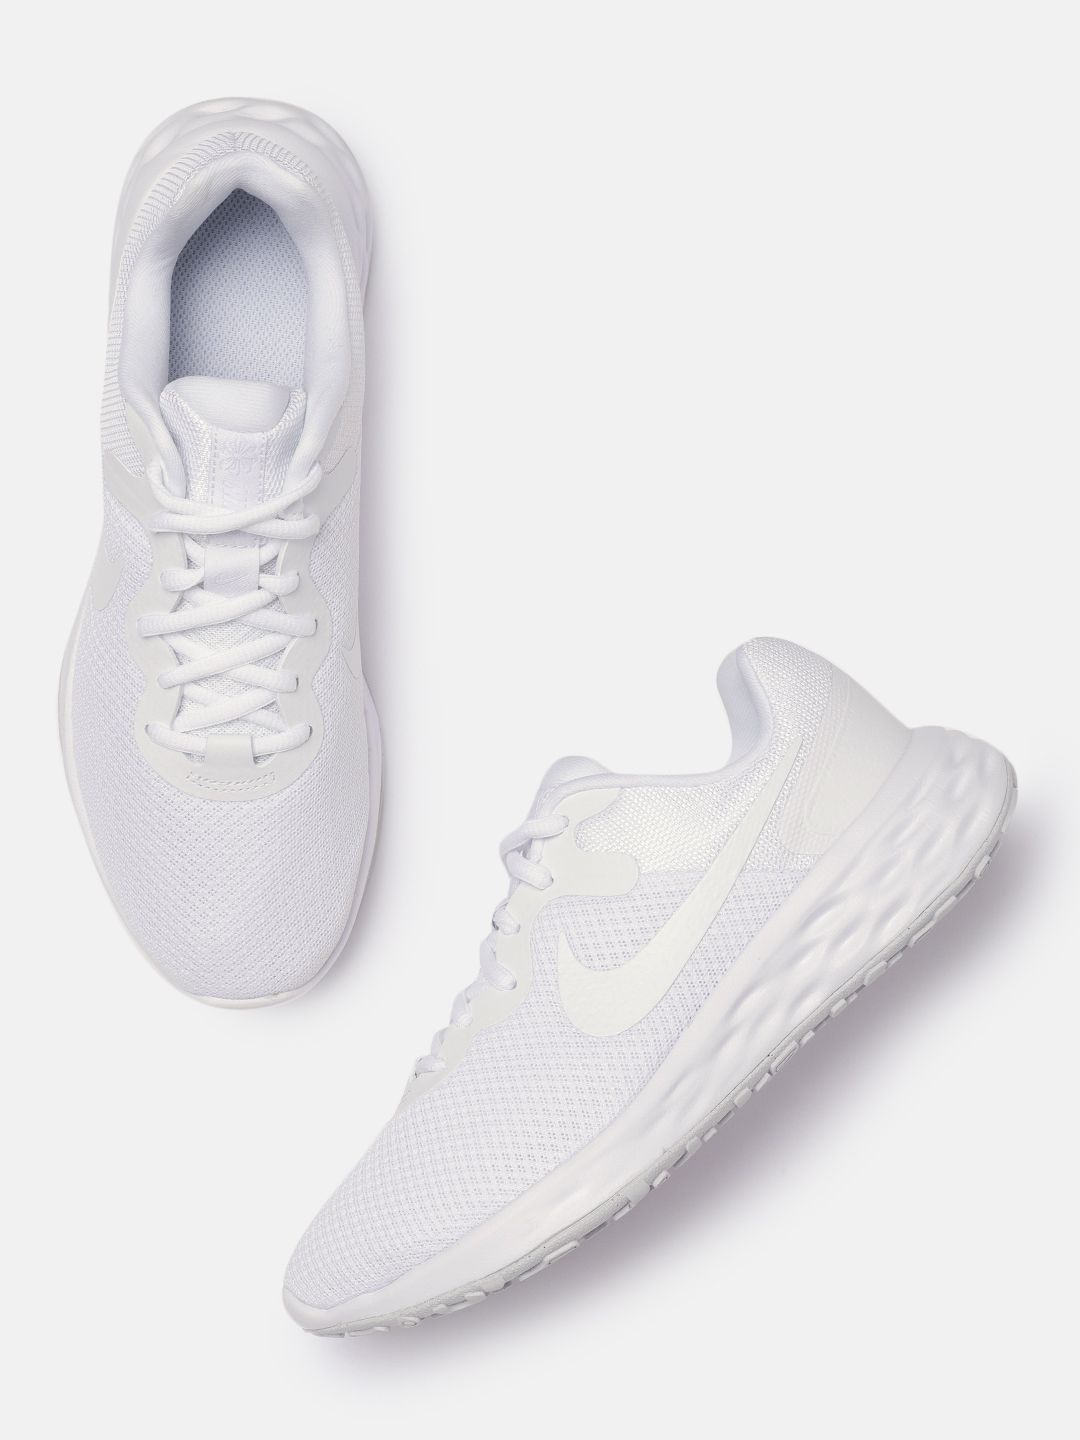 Nike Women White Textile Running Shoes Price in India